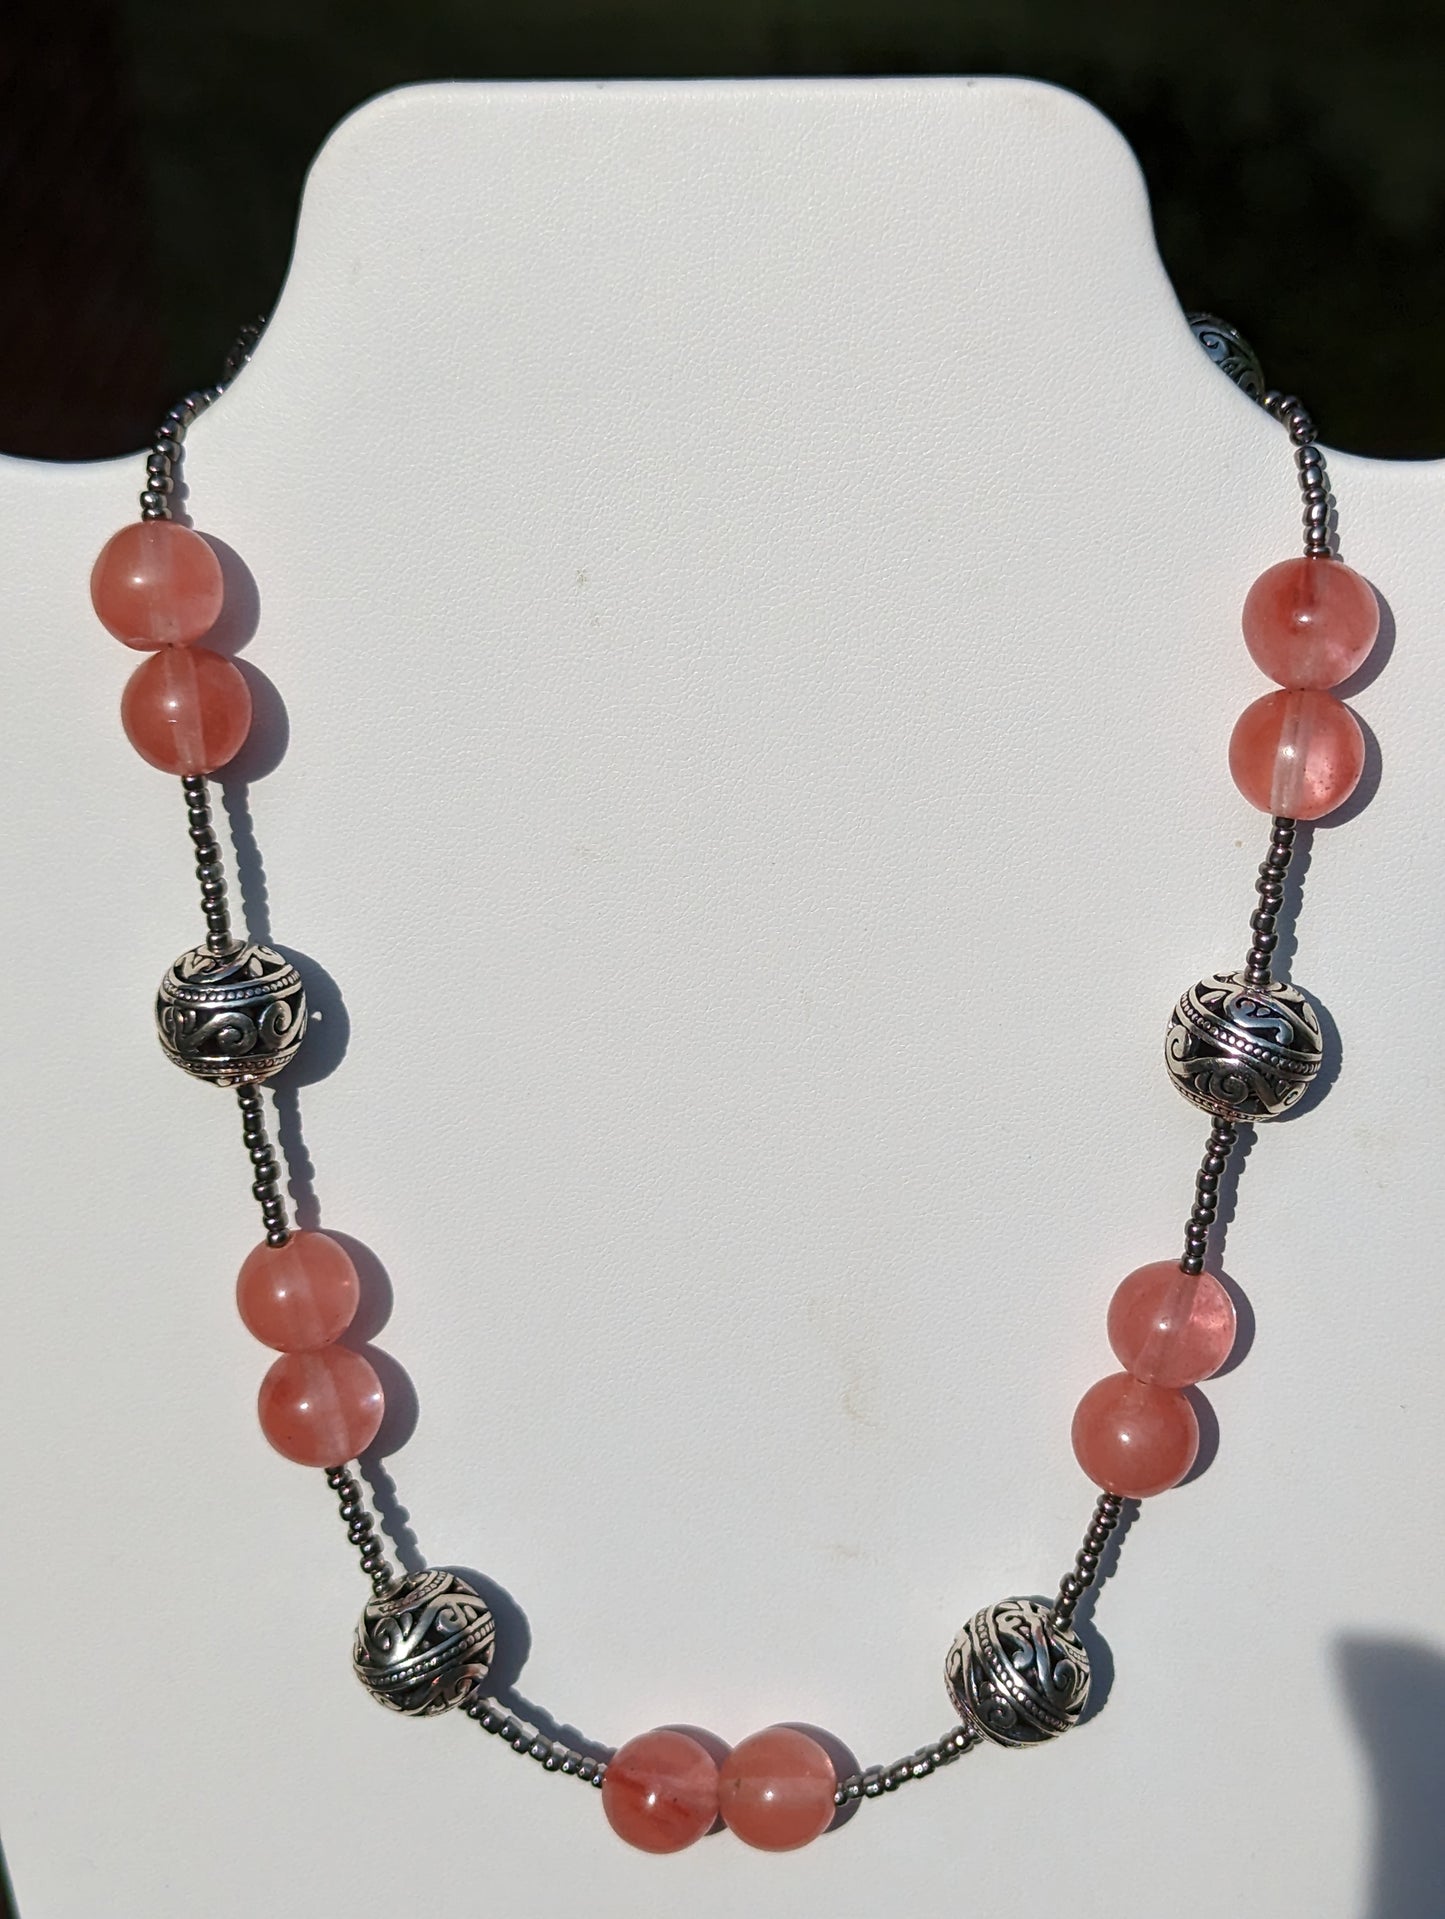 Strawberry Quartz Necklace with Silver-plated Filigree Bead Accents